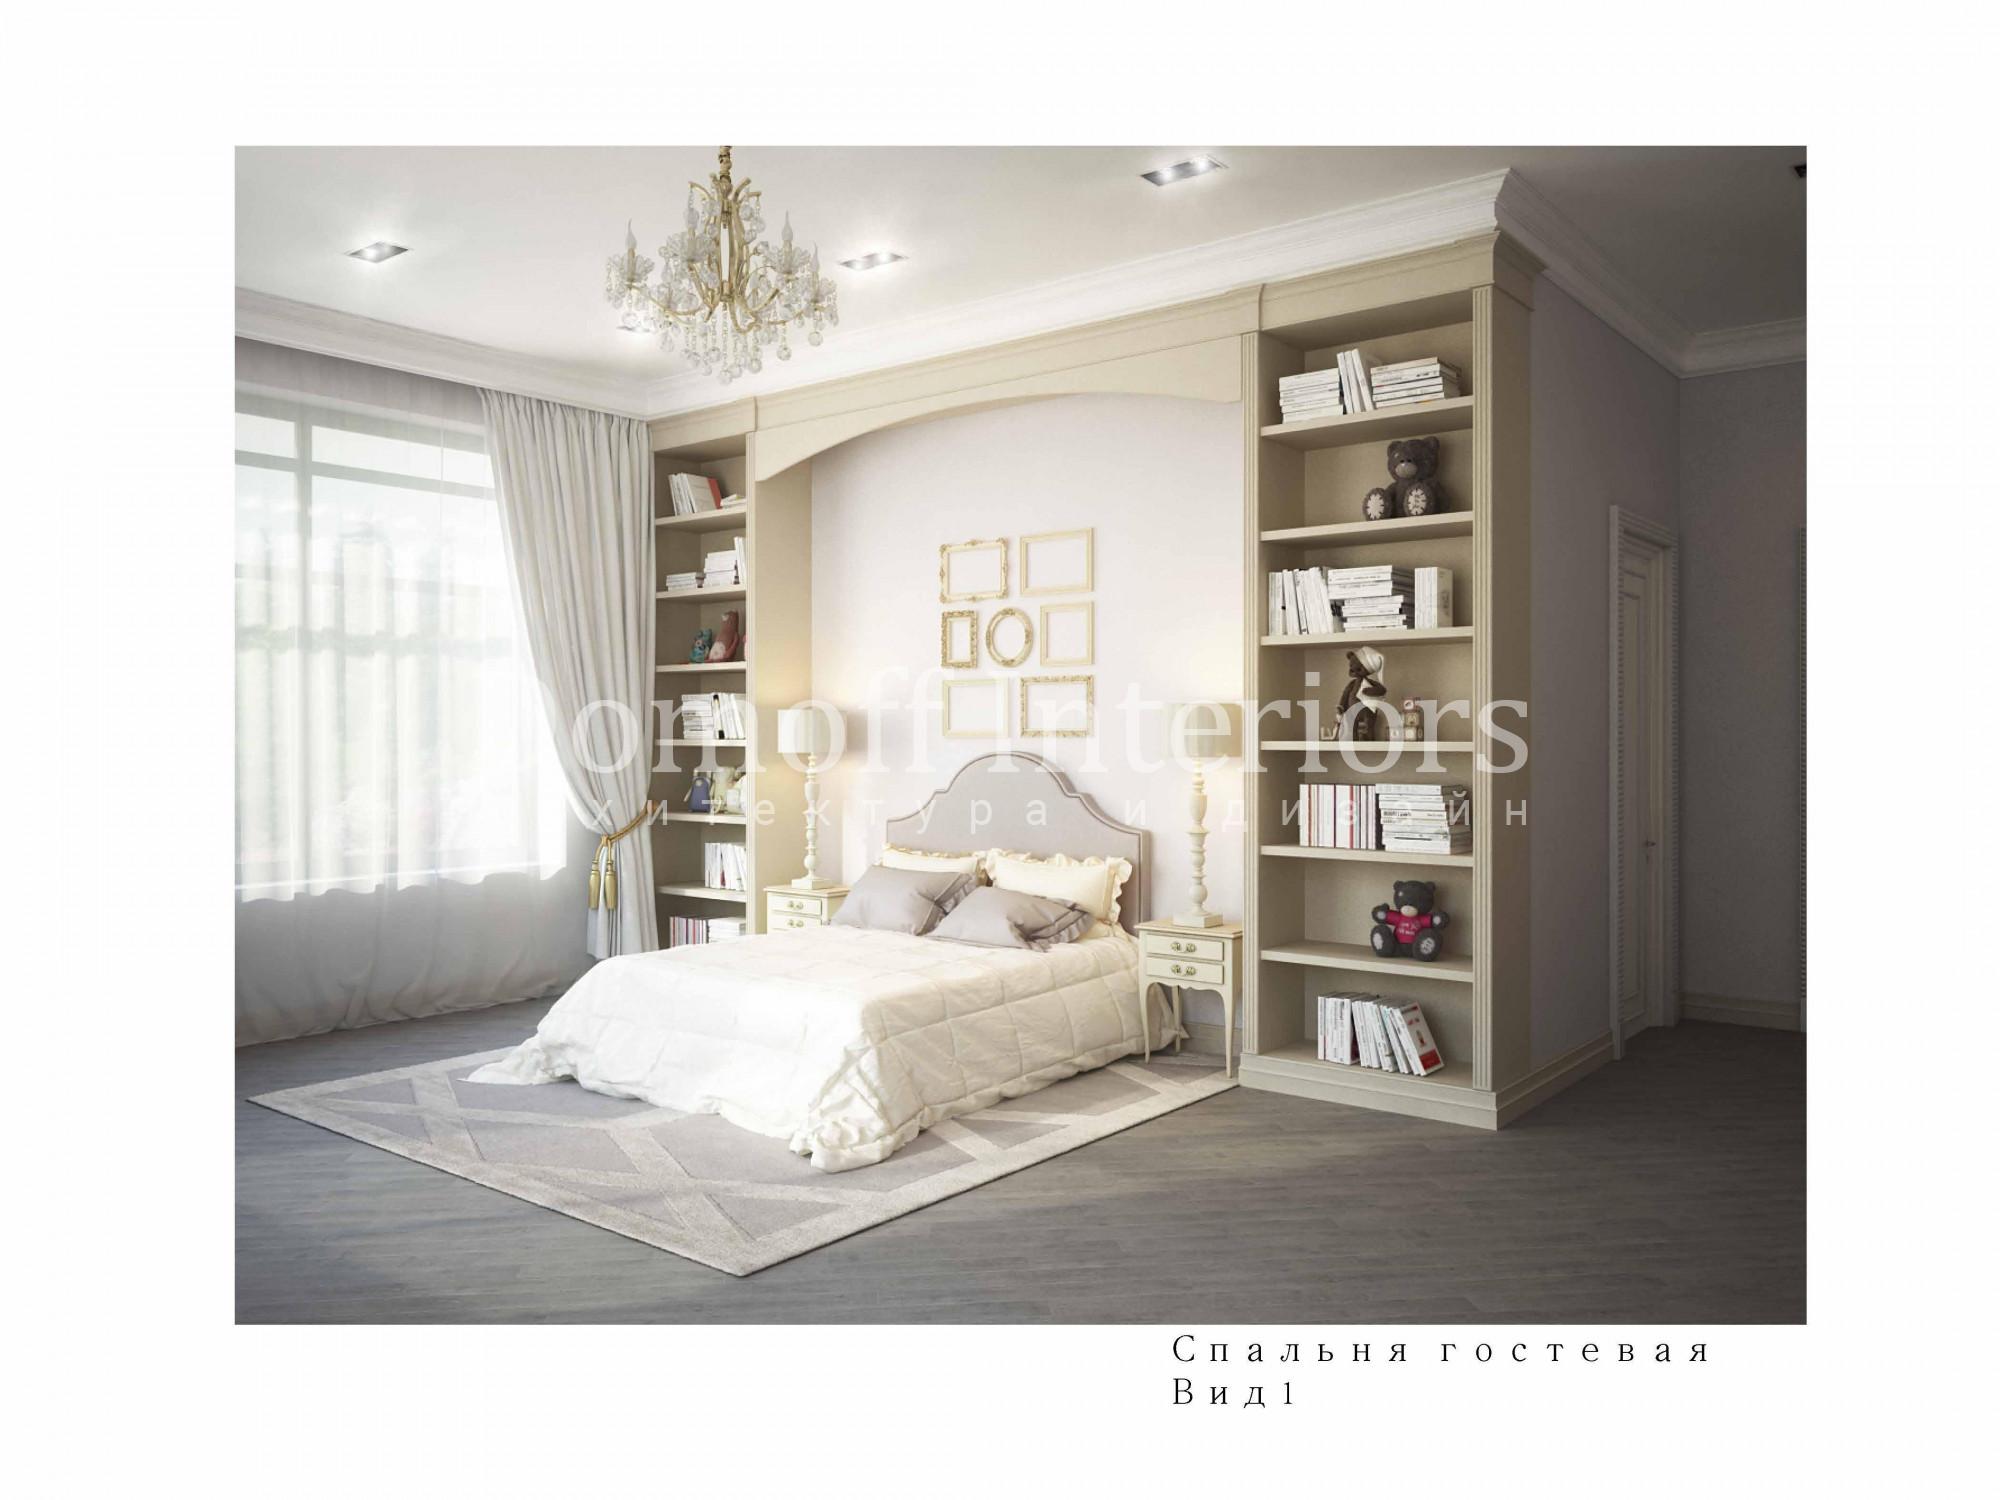 Nursery No. 2 made in the style of Contemporary classics